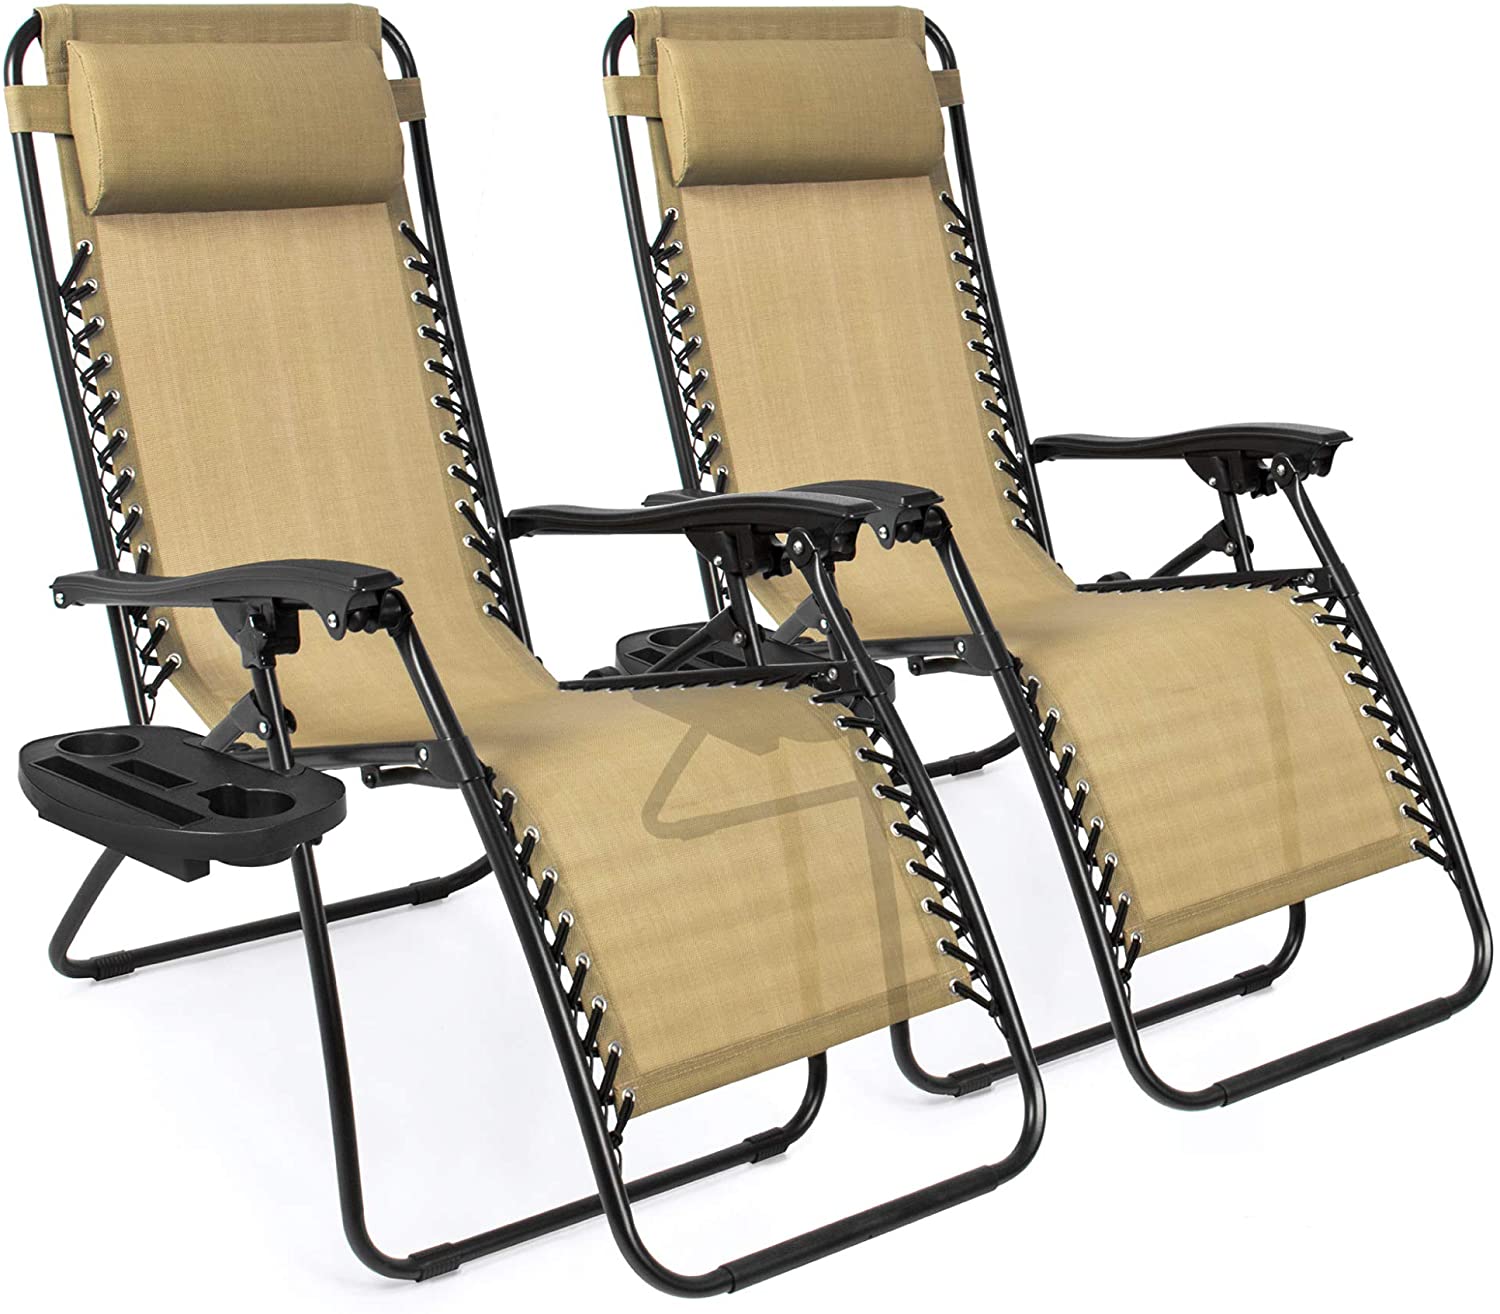 Best Choice Products Patio Chairs Outdoor Furniture, 2-Piece